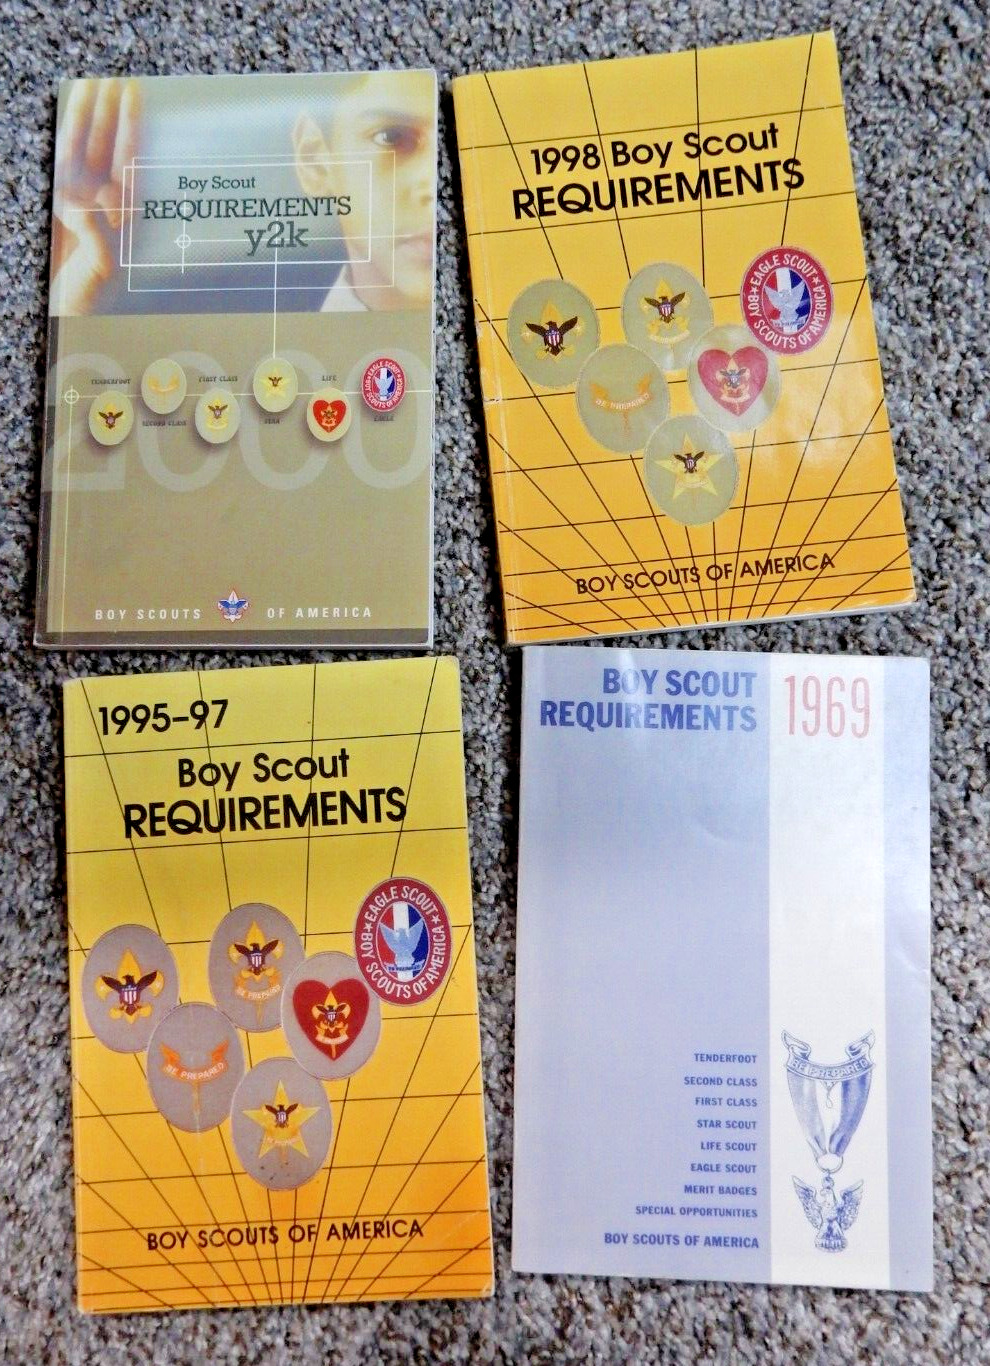 4  Boy Scout Rank and Merit Badge Requirement Books  1969  1995-97  1998 & Y2K